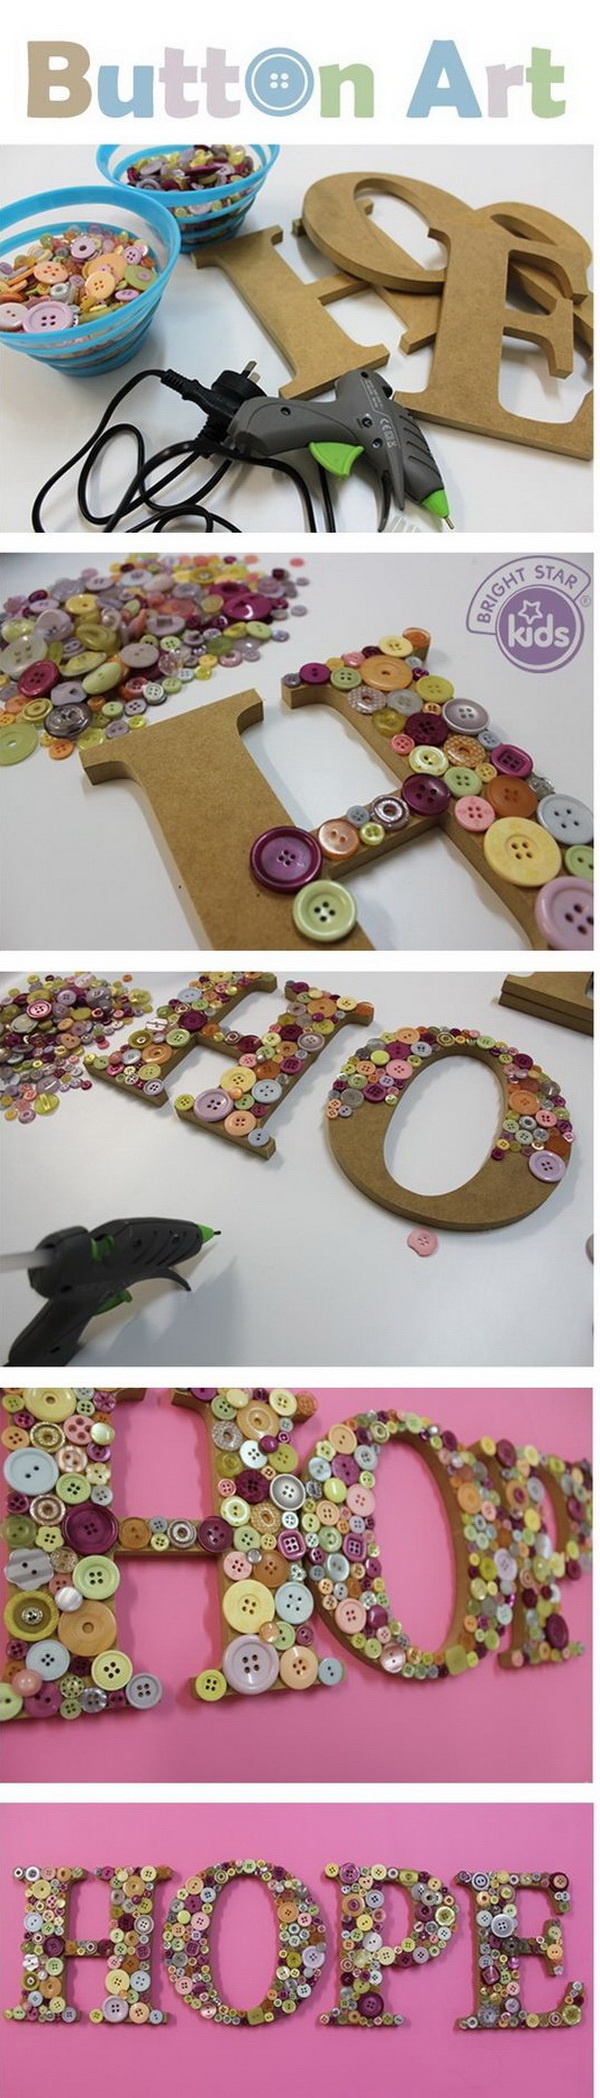 Button Letter Wall Art. Button art – Perfect for birthday party decoration. Easy to make and extremely creative! 